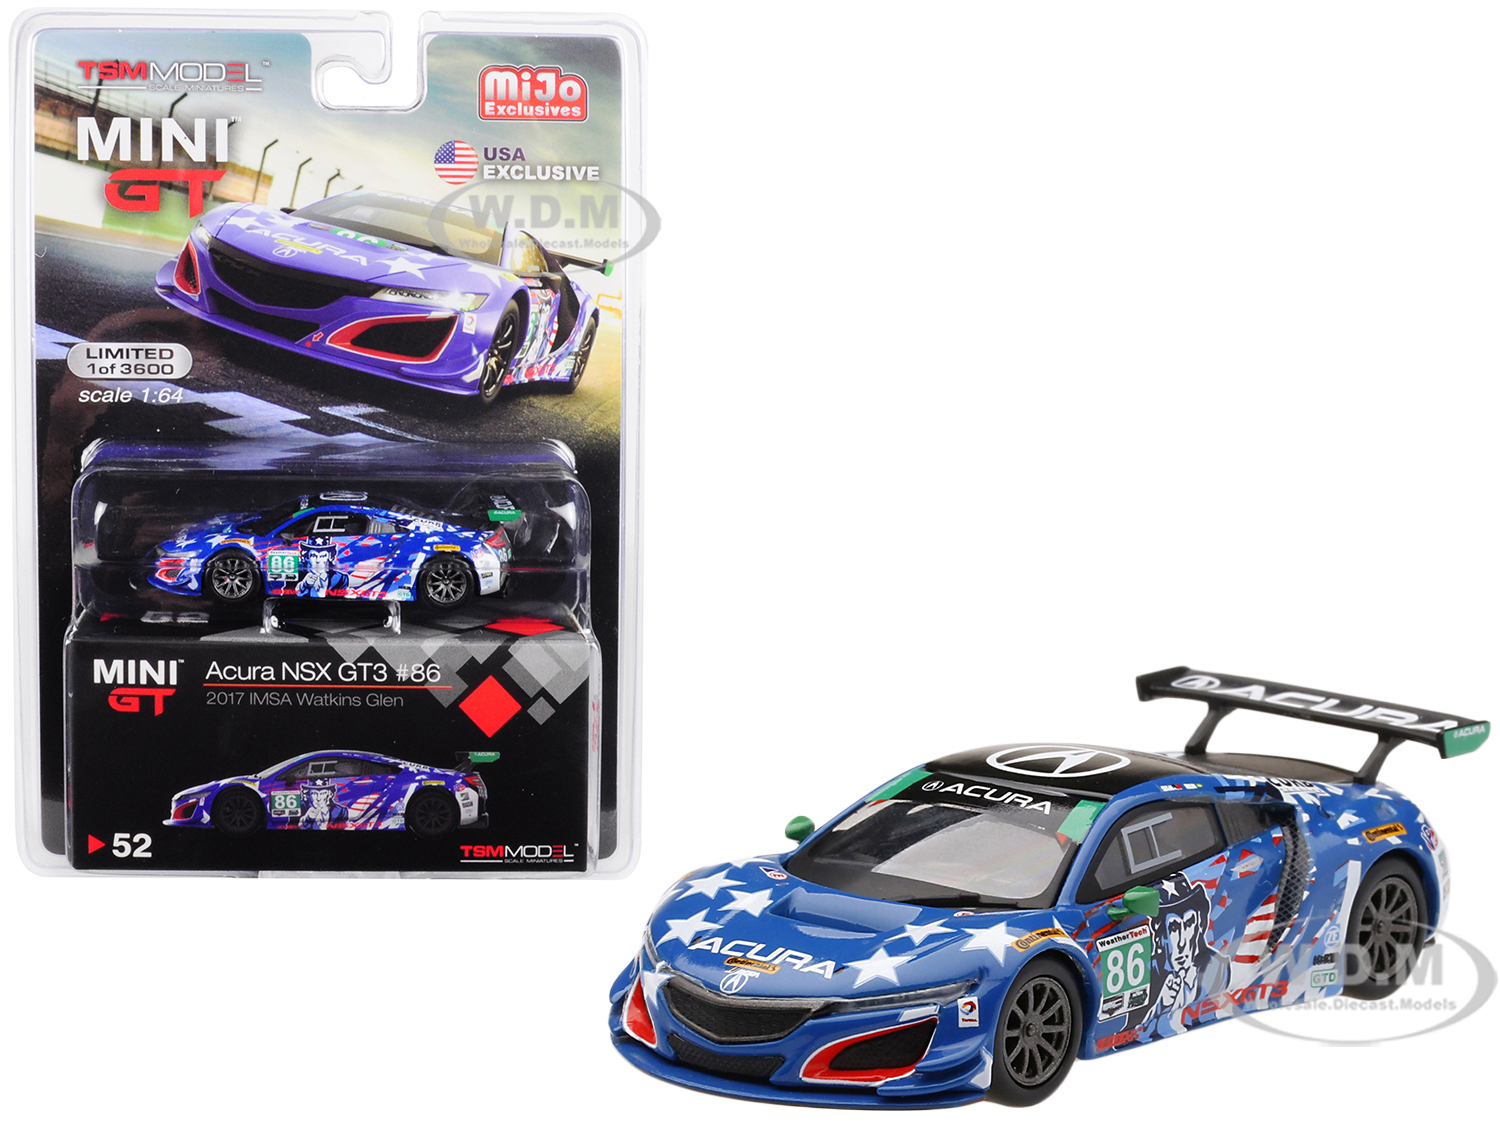 Acura NSX GT3 86 "Uncle Sam" 2017 IMSA Watkins Glen Limited Edition to 3600 pieces Worldwide 1/64 Diecast Model Car by True Scale Miniatures